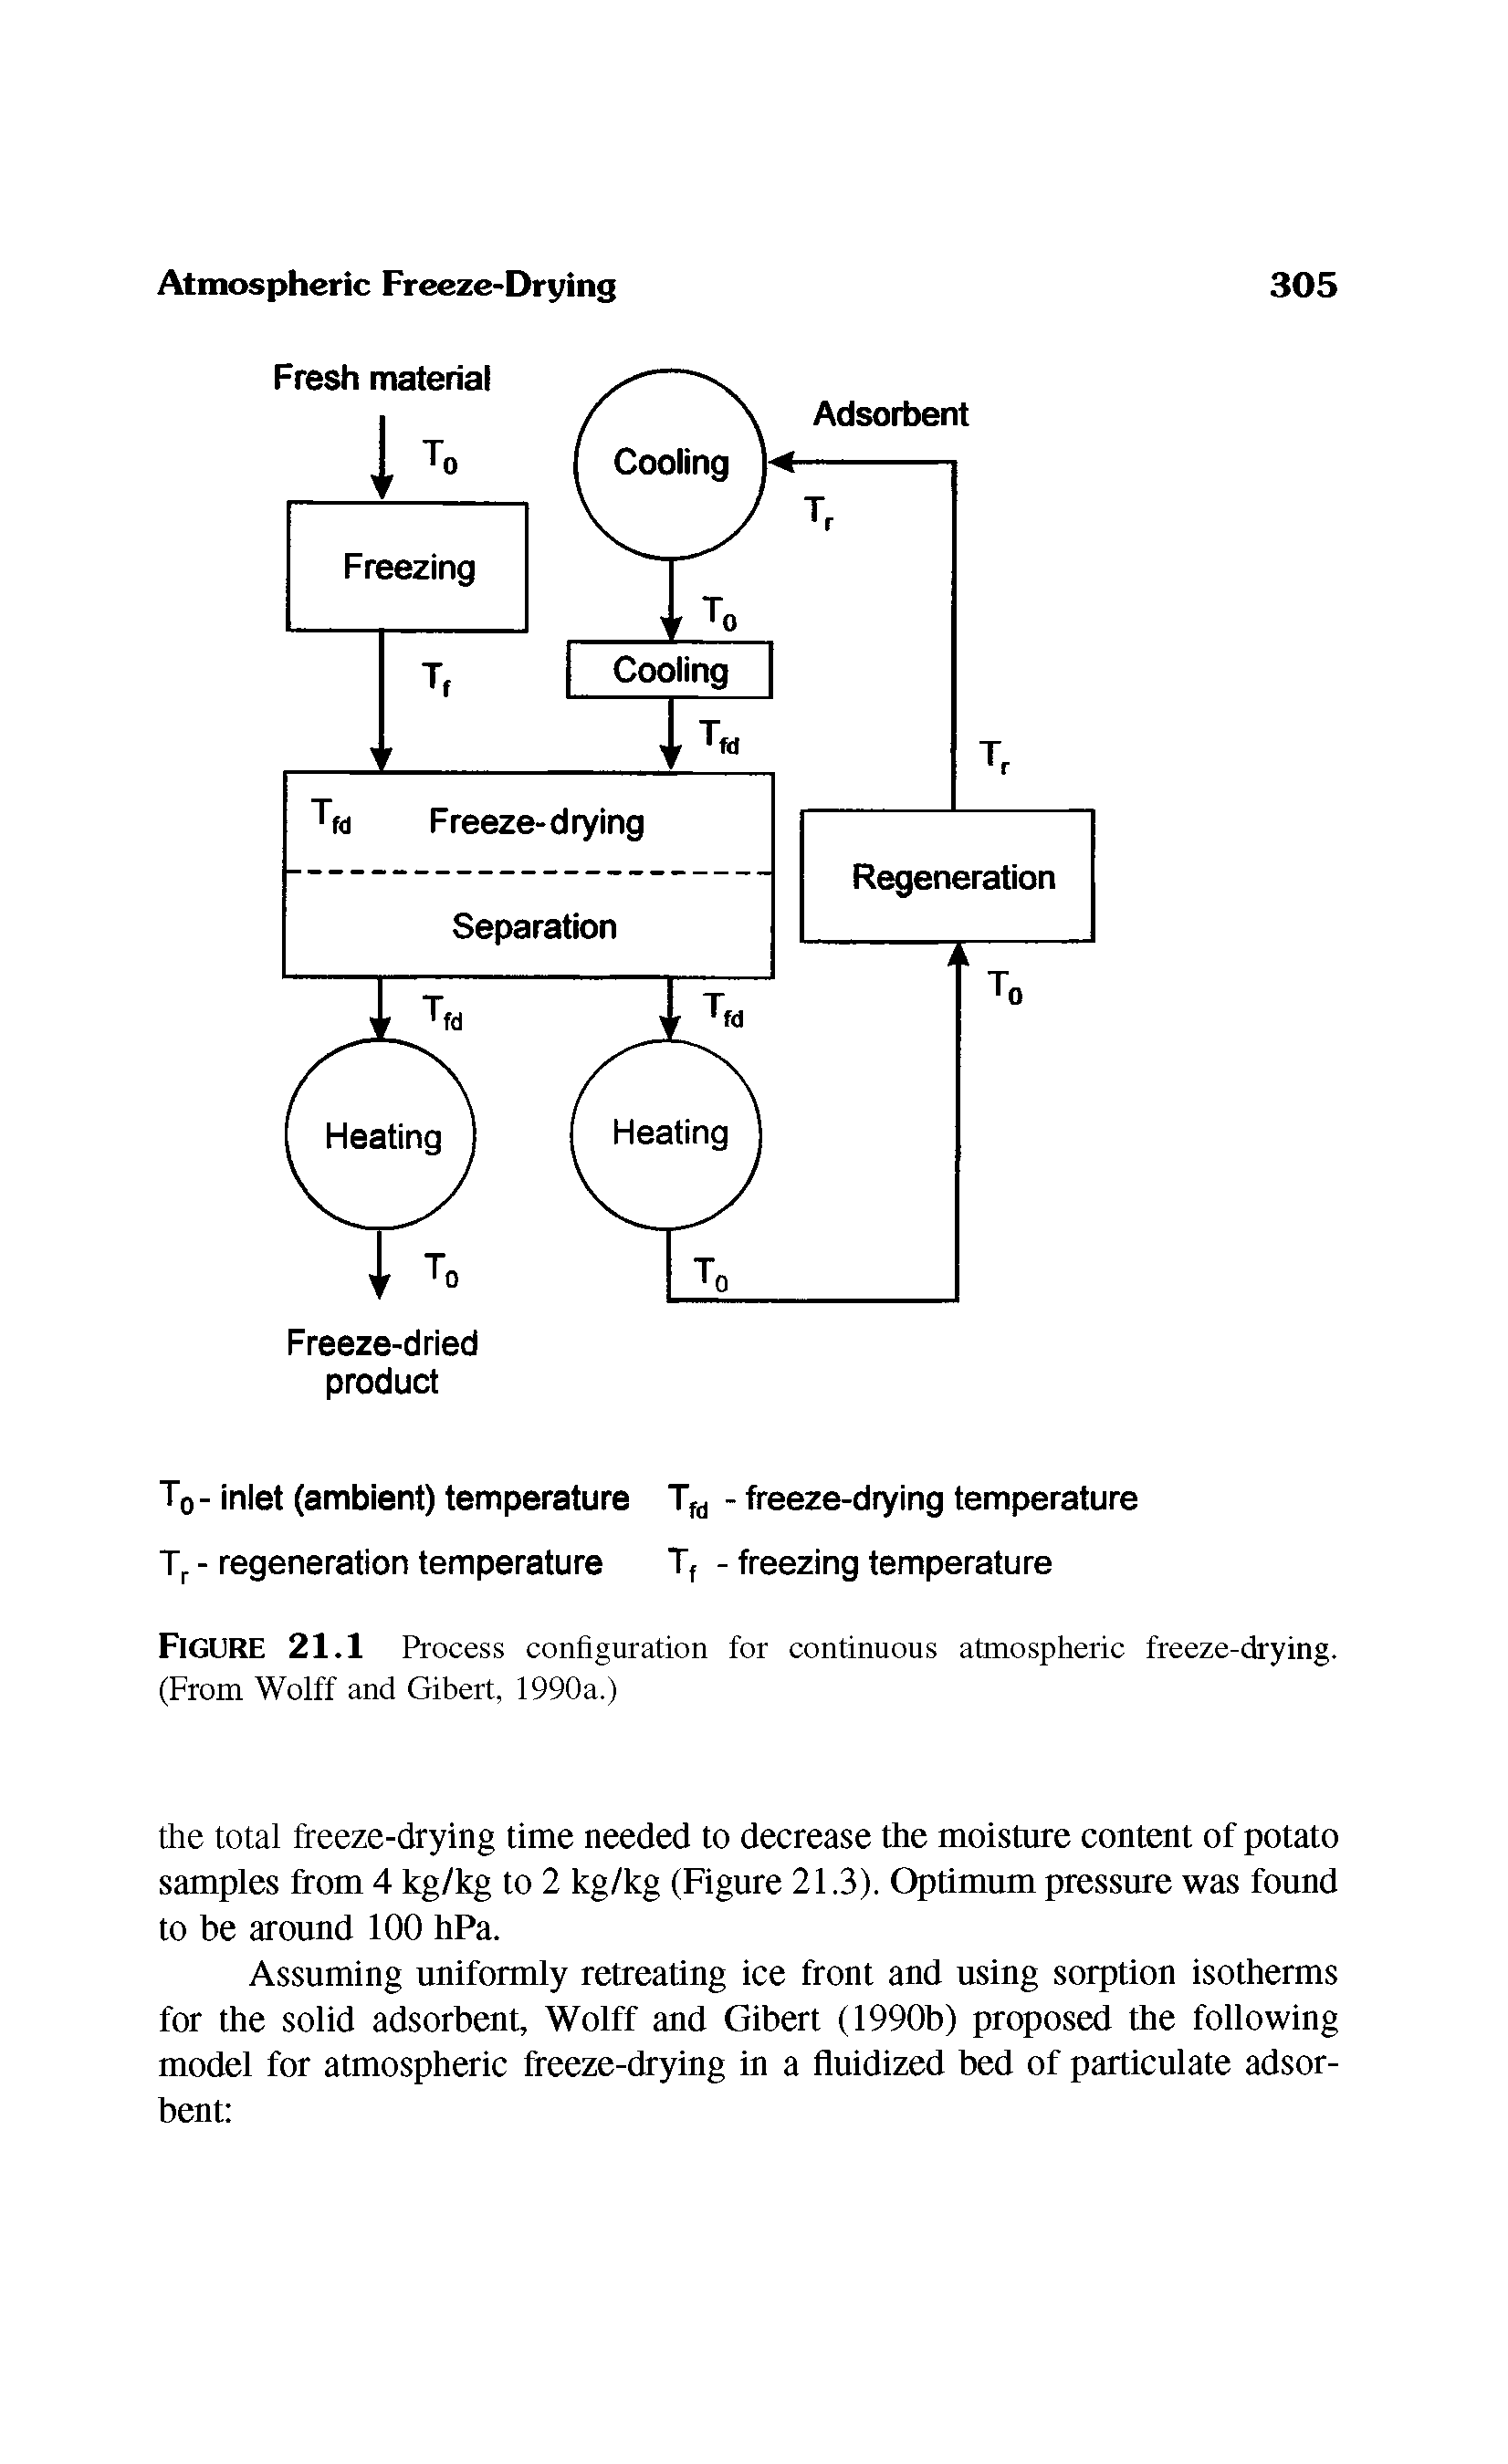 Figure 21.1 Process configuration for continuous atmospheric freeze-drying. (From Wolff and Gibert, 1990a.)...